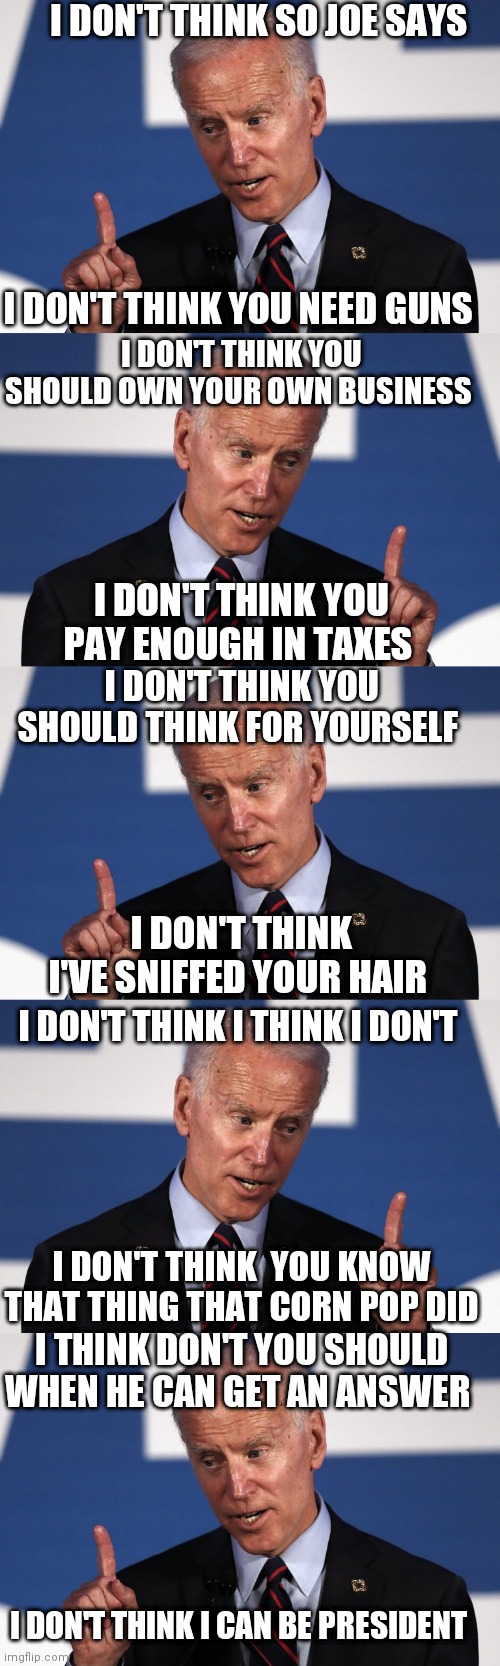 I DON'T THINK SO JOE | I DON'T THINK SO JOE SAYS; I DON'T THINK YOU NEED GUNS; I DON'T THINK YOU SHOULD OWN YOUR OWN BUSINESS; I DON'T THINK YOU PAY ENOUGH IN TAXES; I DON'T THINK YOU SHOULD THINK FOR YOURSELF; I DON'T THINK I'VE SNIFFED YOUR HAIR; I DON'T THINK I THINK I DON'T; I DON'T THINK  YOU KNOW THAT THING THAT CORN POP DID; I THINK DON'T YOU SHOULD WHEN HE CAN GET AN ANSWER; I DON'T THINK I CAN BE PRESIDENT | image tagged in i don't think so joe | made w/ Imgflip meme maker